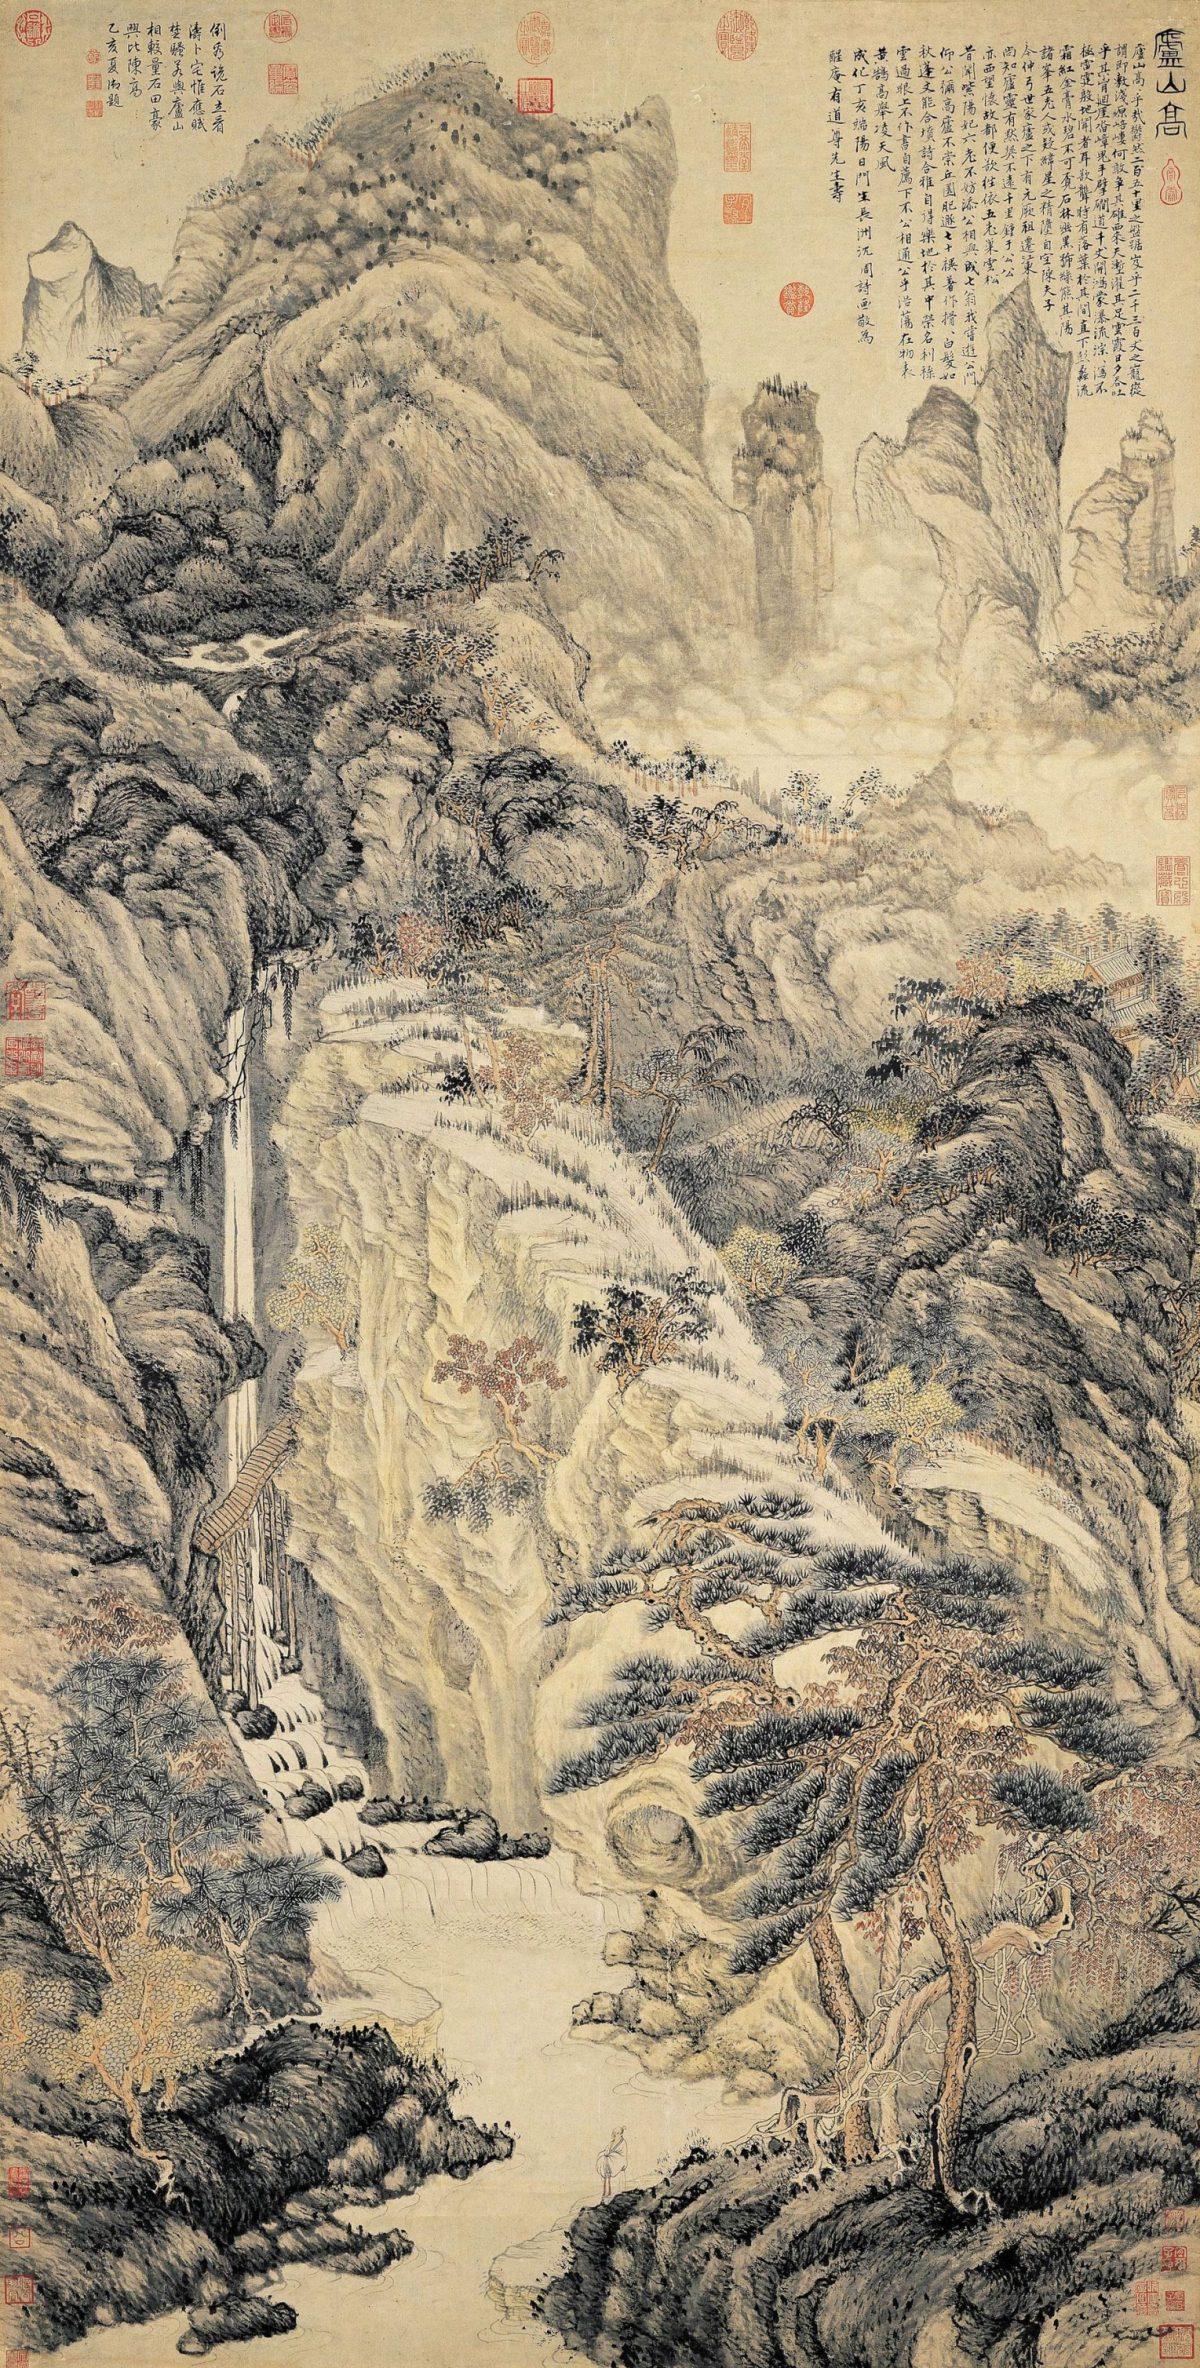 "Lofty Mount Lu," 1467, by Shen Zhou. Hanging scroll with ink and color on paper, 76.3 inches by 38.6 inches. National Palace Museum, Taipei. (Public Domain)